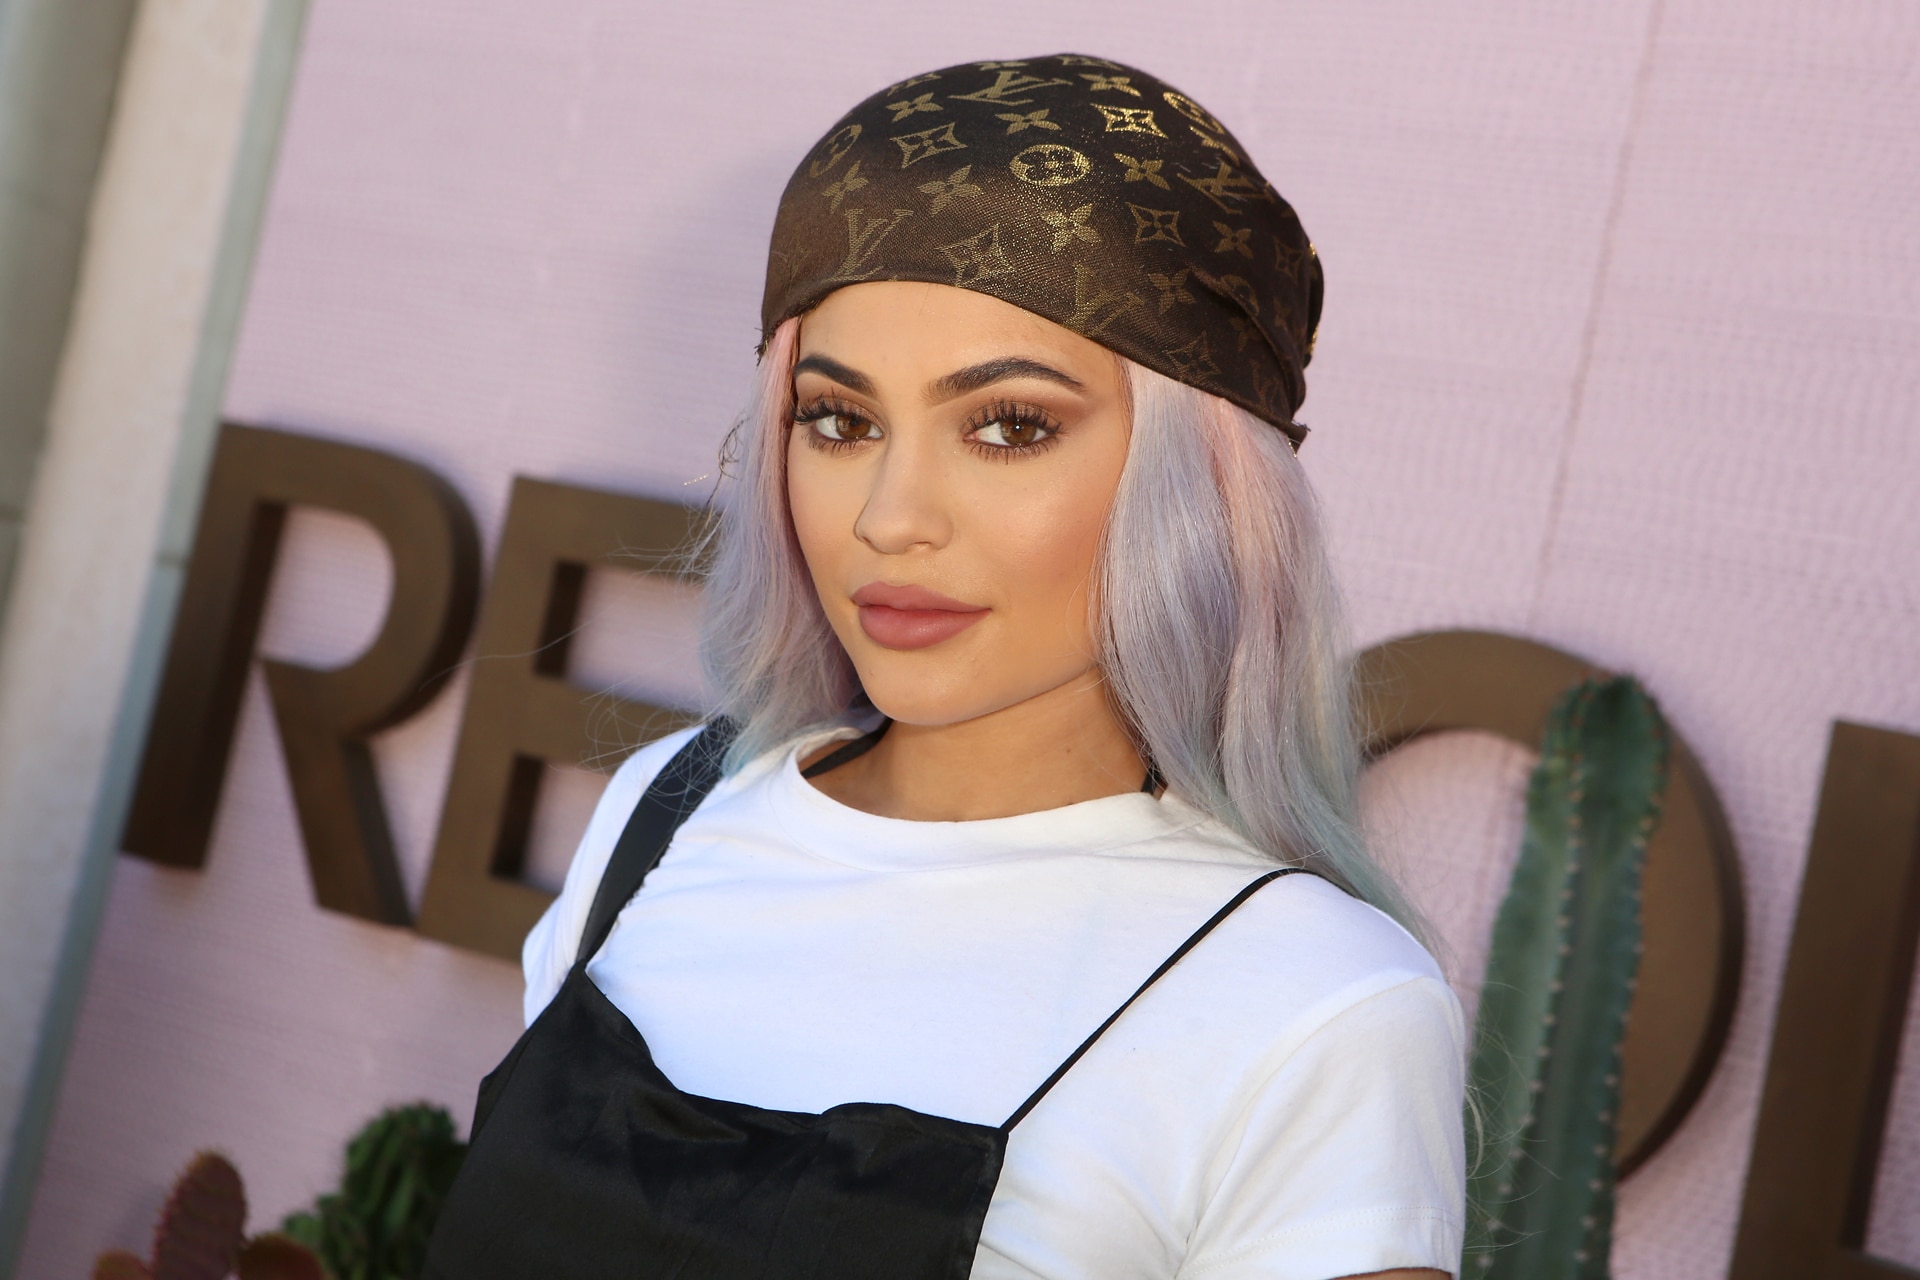 Kylie Jenner has updated her million dollar closet for spring with new  Hermes bags, LV shoes, etc and the Internet is not happy - Luxurylaunches